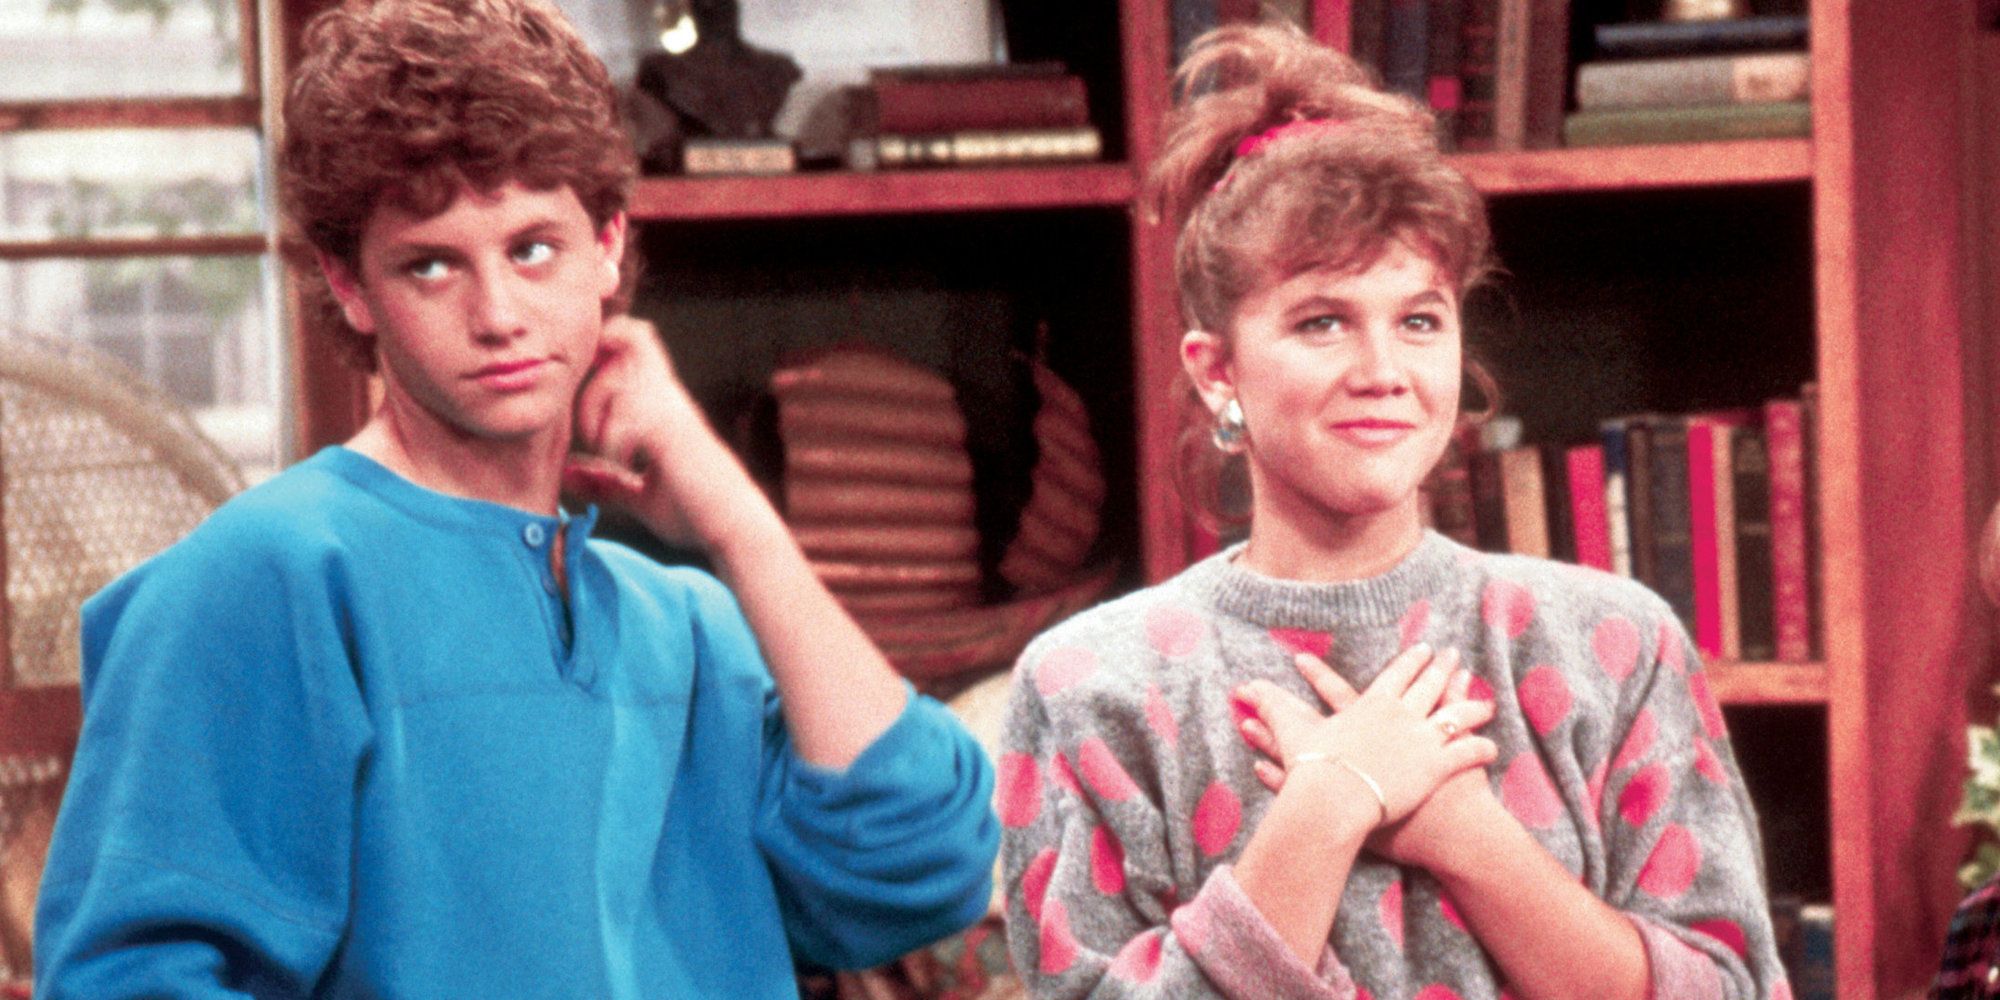 10 Female Sitcom Characters From The 80s That Would Never Fly Today